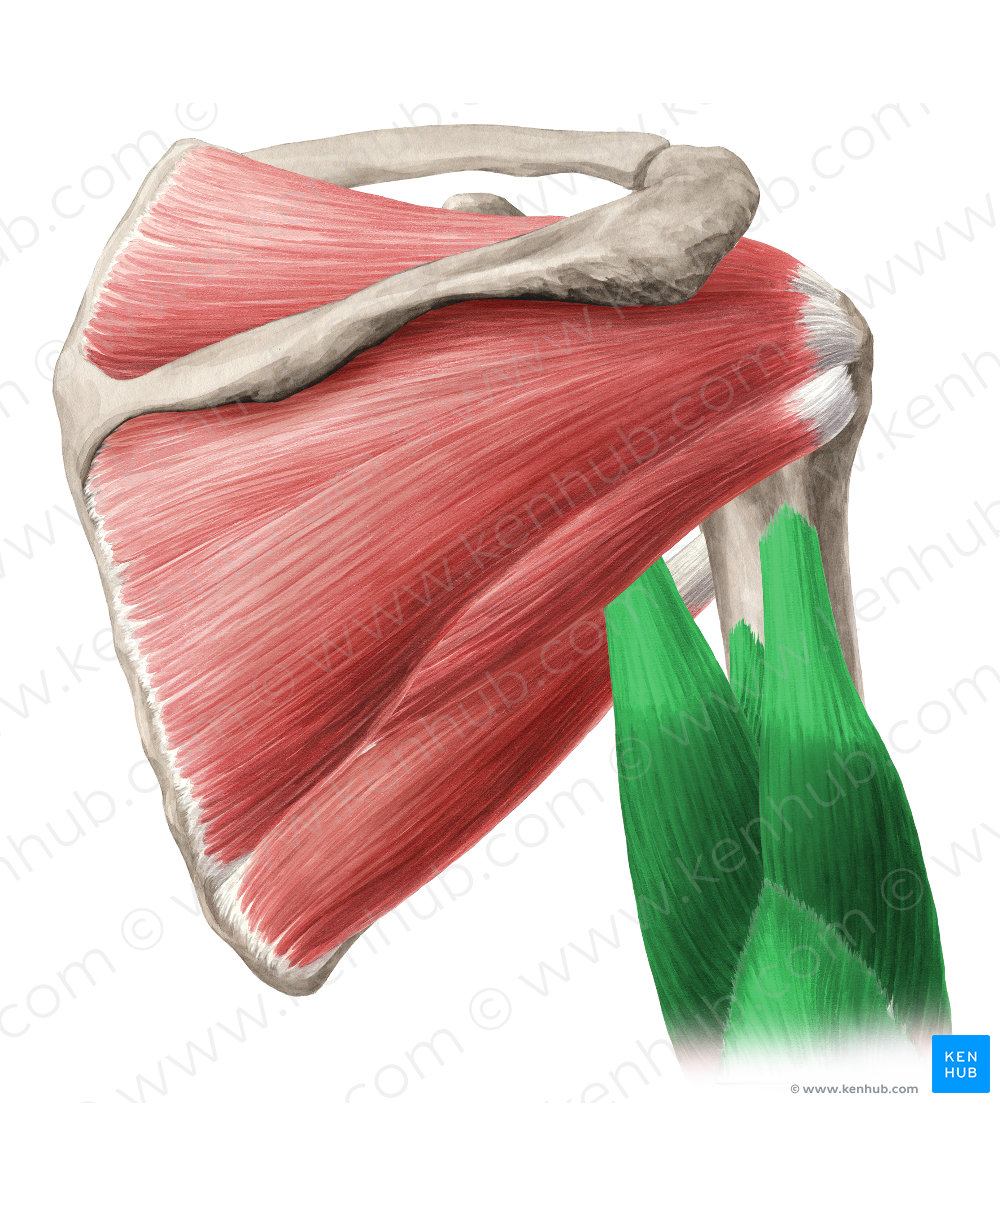 Triceps brachii muscle (#6154)